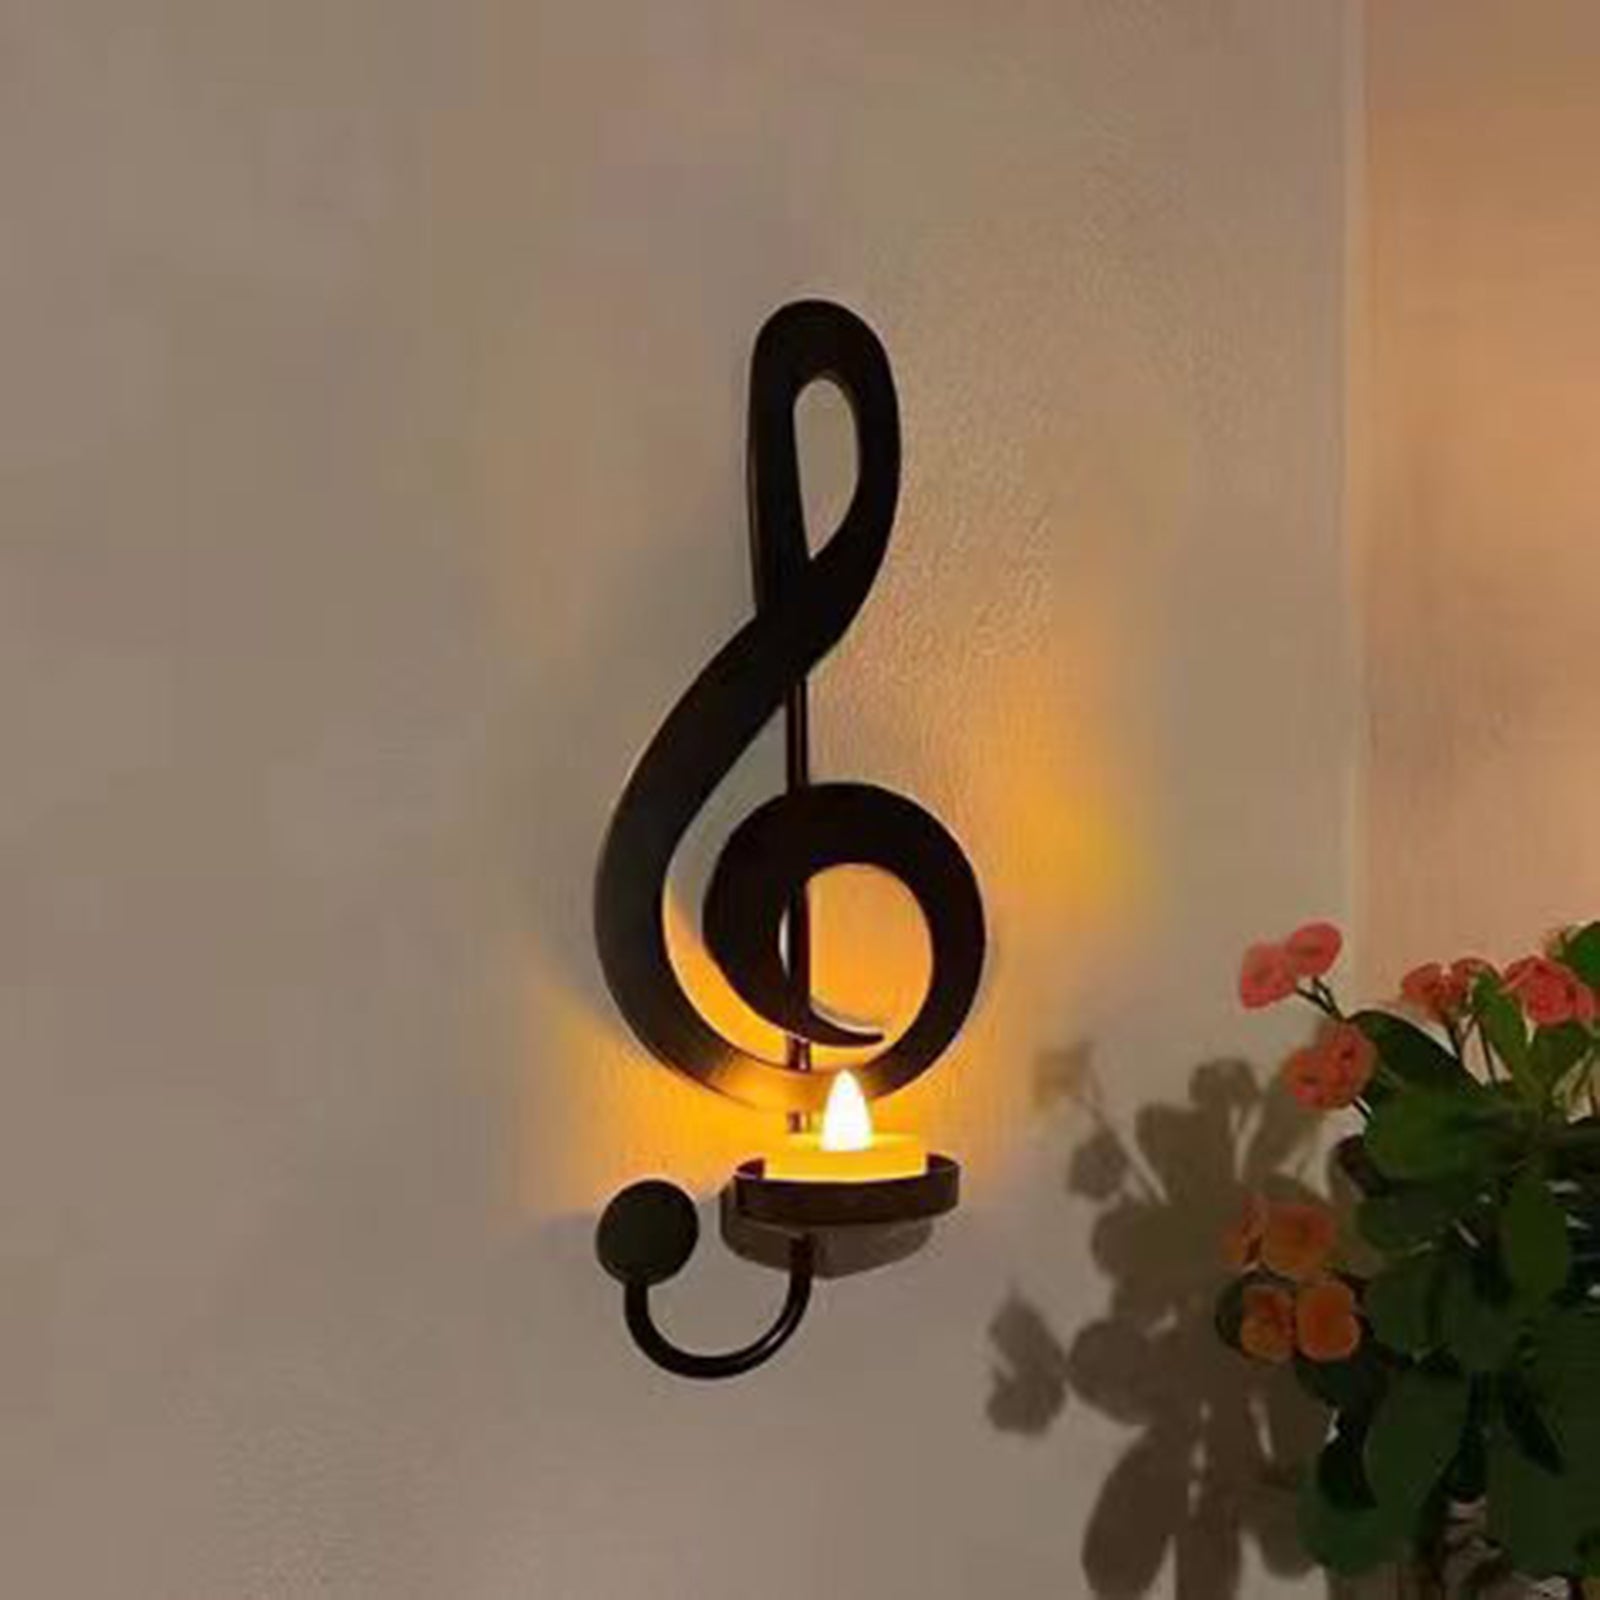 Music Note Wall Sconce, Treble Clef Wall Decor Vintage Art Musical Note-Style Candle Holders for Home Living Room